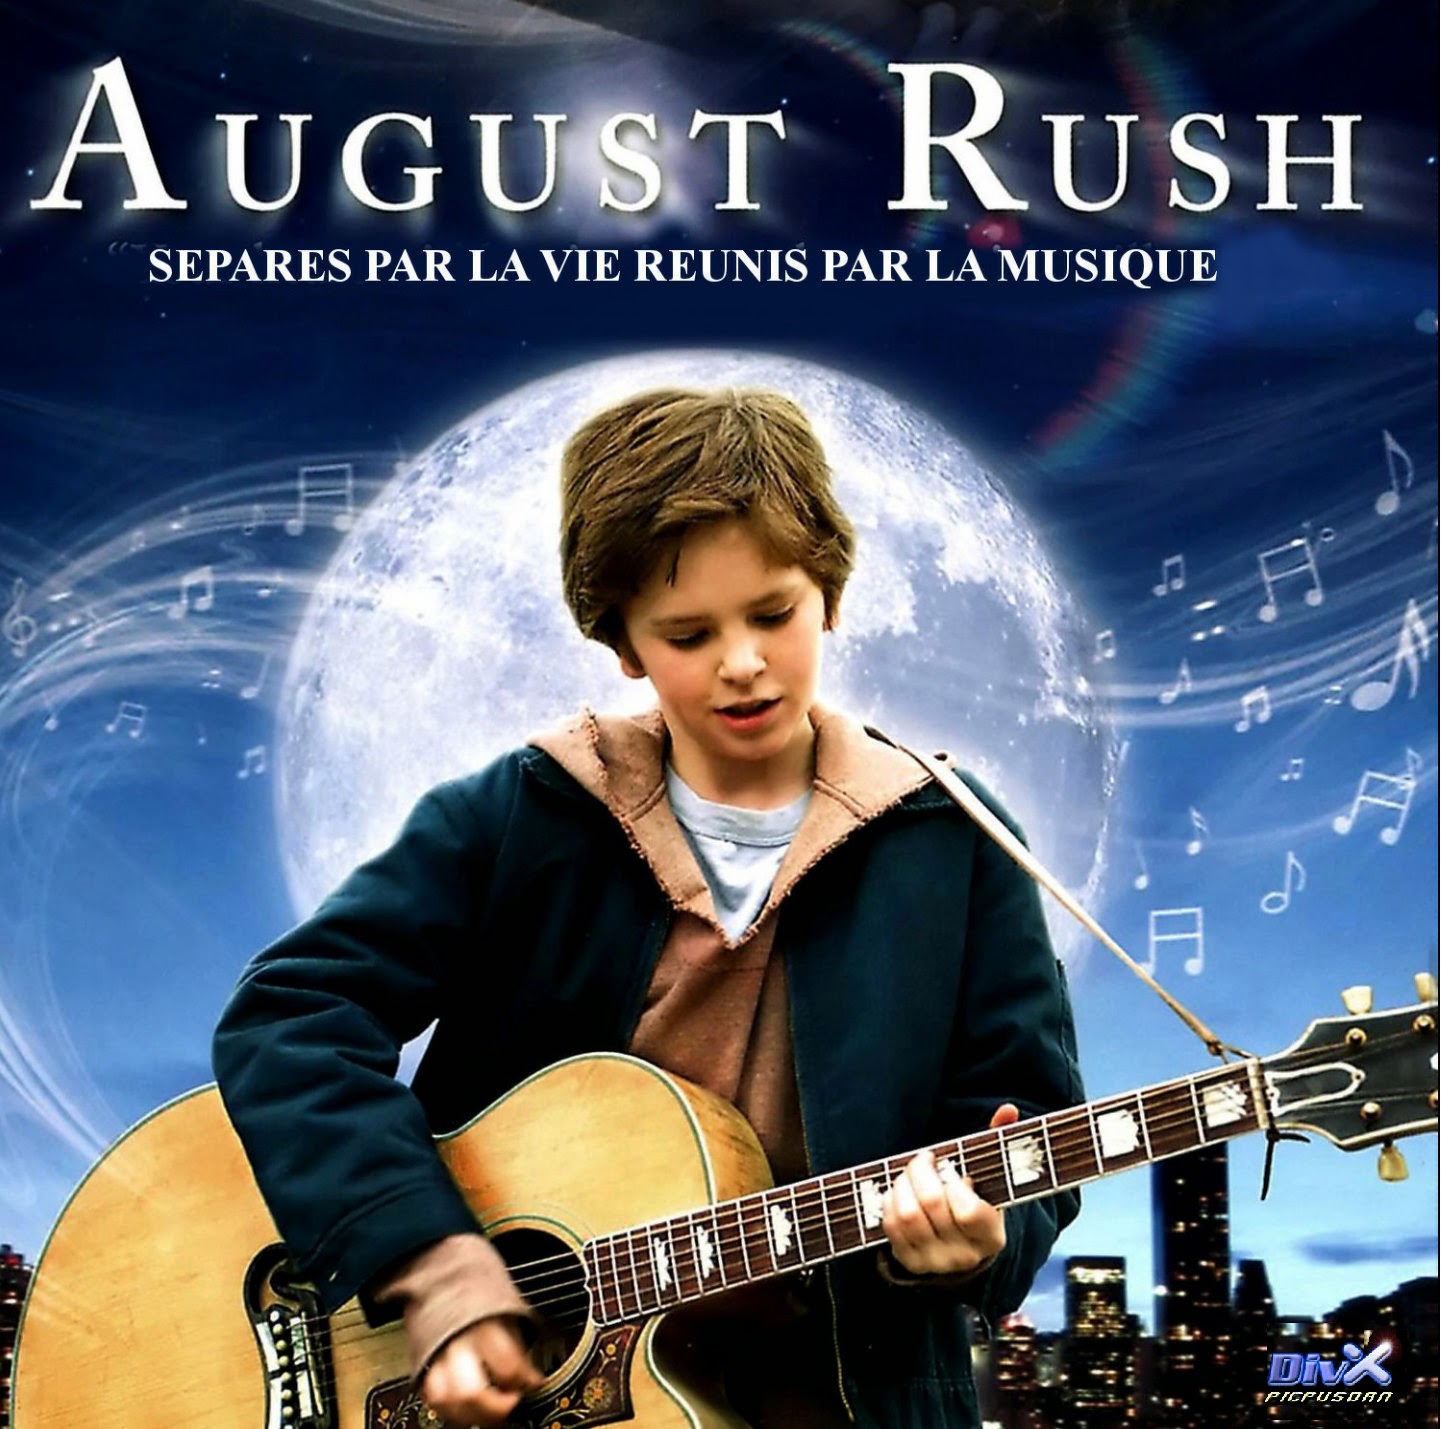 movie review about august rush